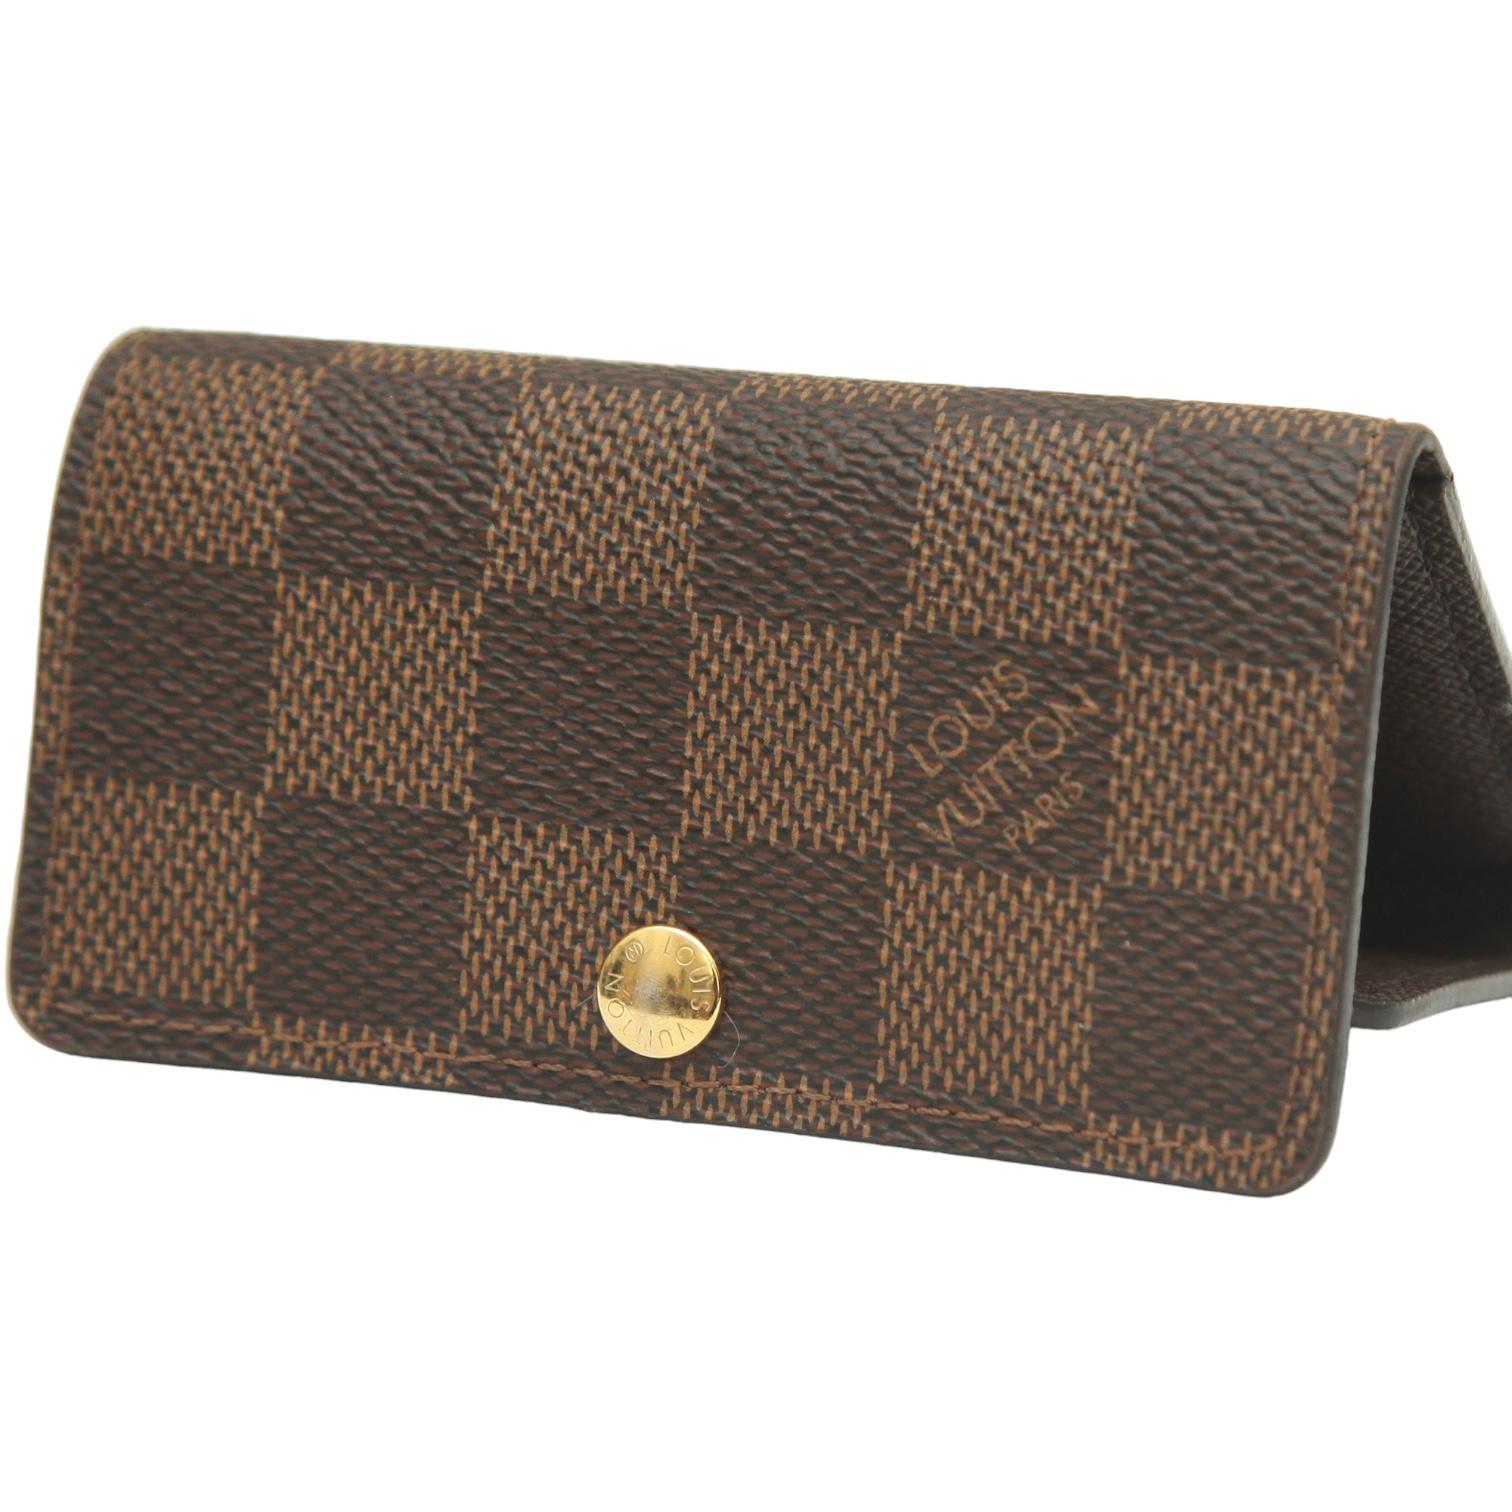 LOUIS VUITTON Damier Canvas 6 KEY HOLDER Case Vachetta Leather Snap In Good Condition For Sale In Hollywood, FL